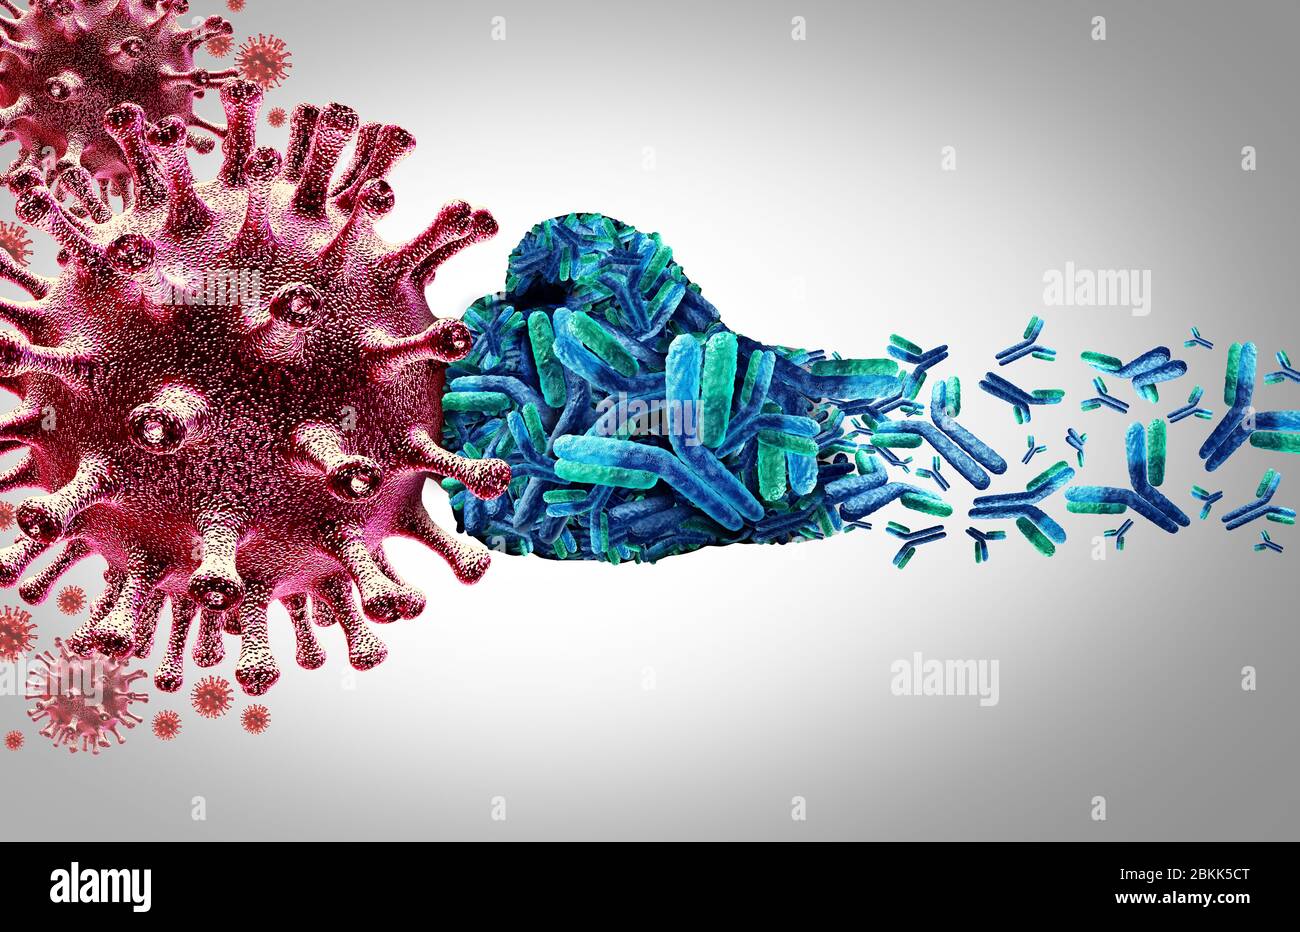 Virus Antibody and Immunoglobulin concept as antibodies attacking contagious virus cells and pathogens as a 3D illustration. Stock Photo